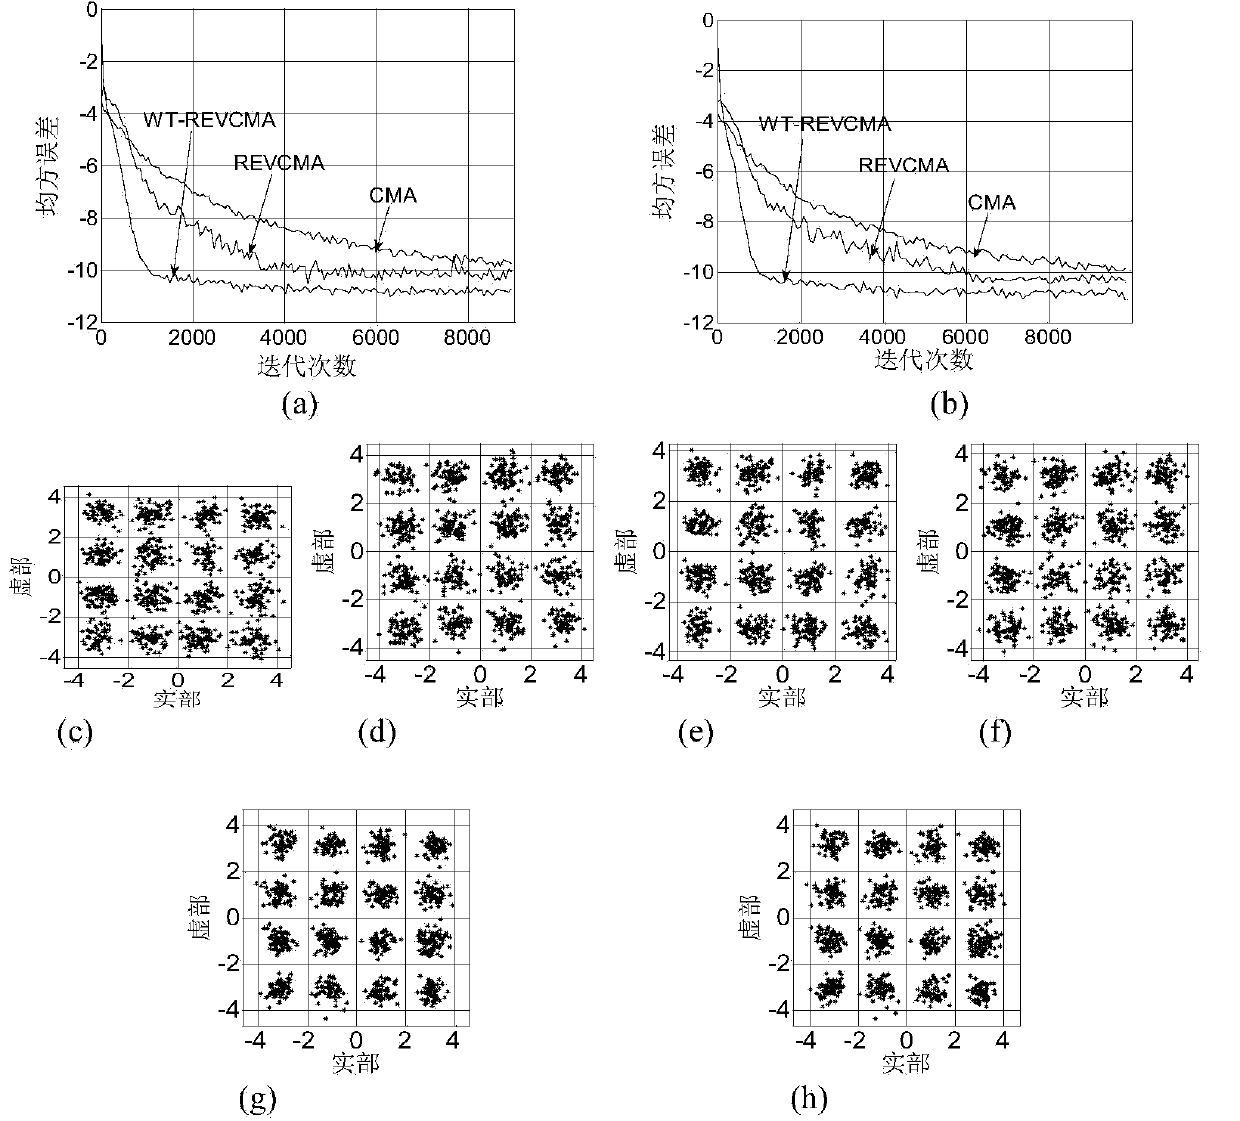 Wavelet constant modulus blind equalization method in MIMO (Multiple Input Multiple Output) system